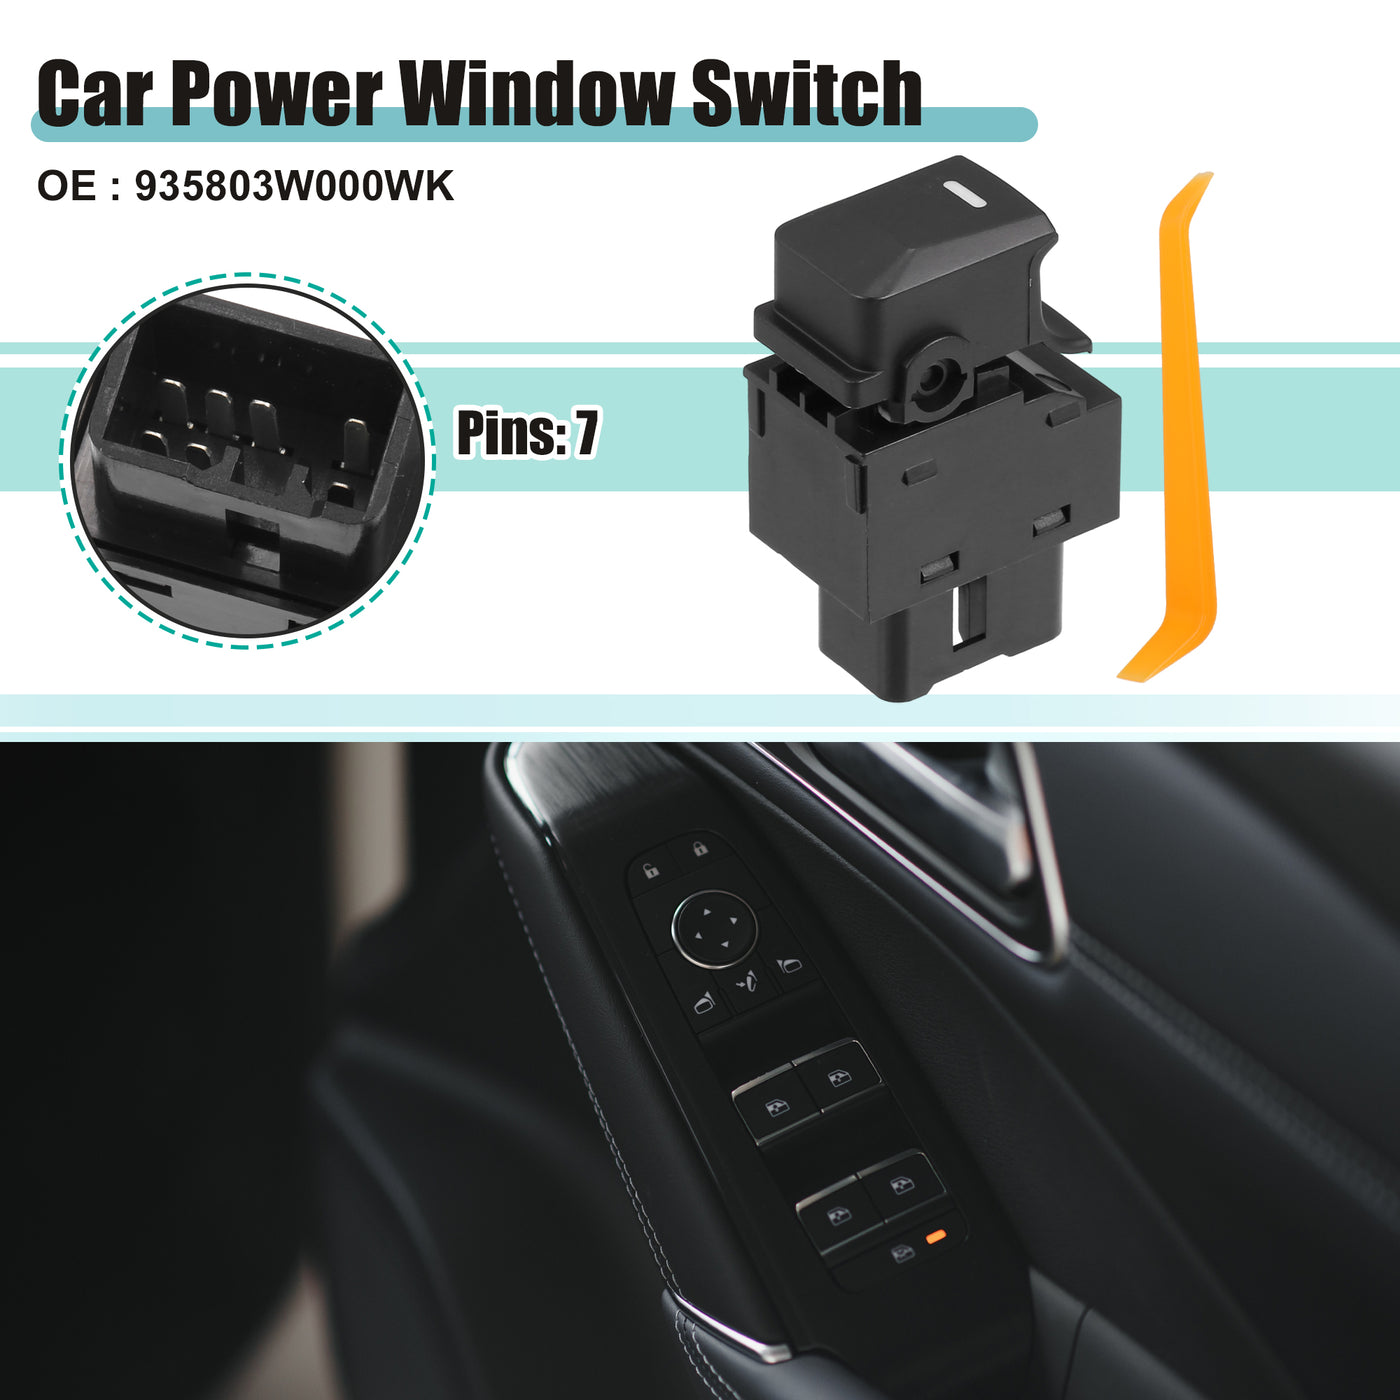 ACROPIX Power Window Switch Window Control Switch Fit for Kia Sportage 2011-2013 with Removal Tool No.935803W000WK - Pack of 1